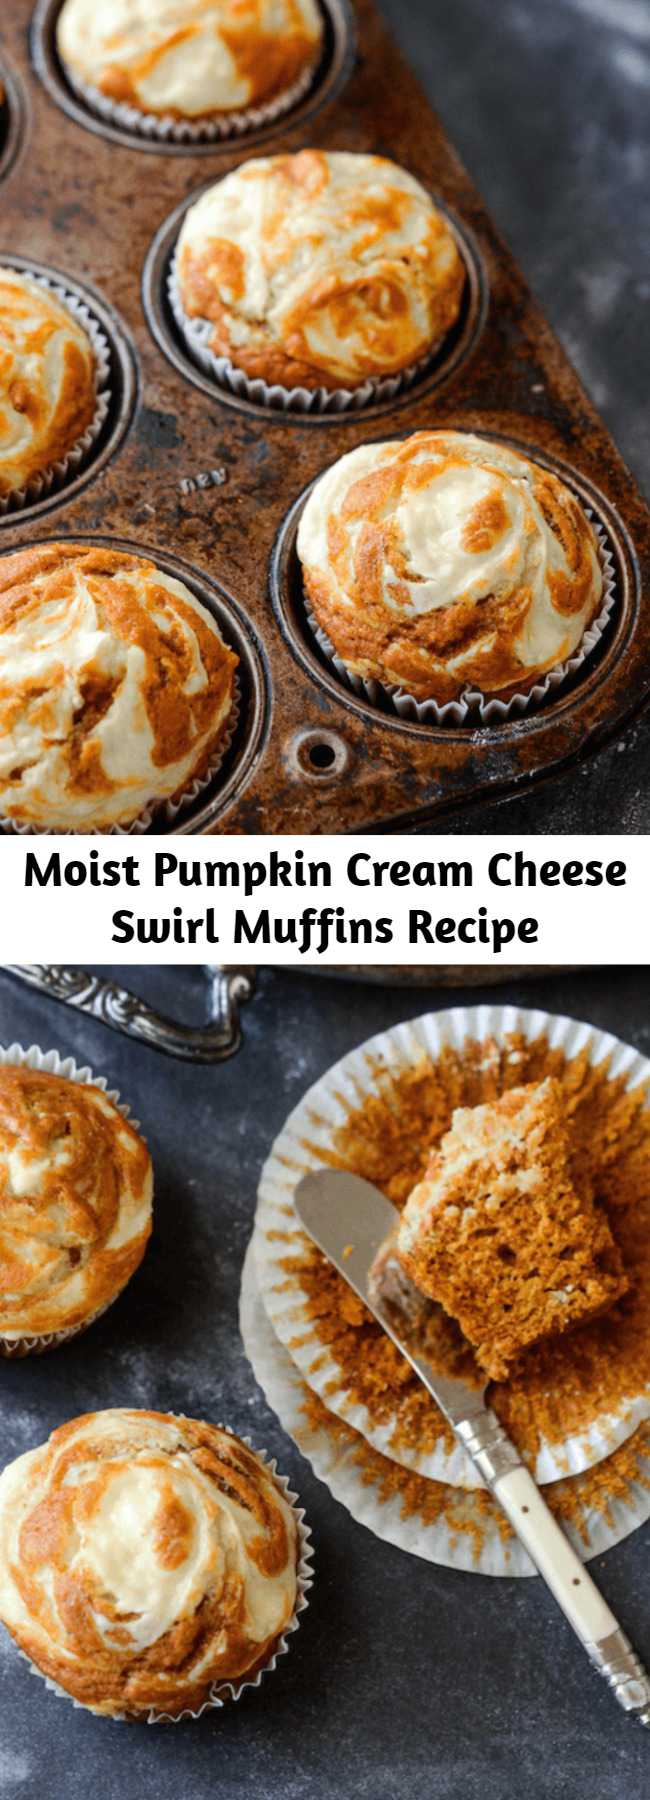 Moist Pumpkin Cream Cheese Swirl Muffins Recipe - Moist spiced pumpkin muffins are topped with sweet cream cheese that melts into them as they bake and only take 30 minutes!